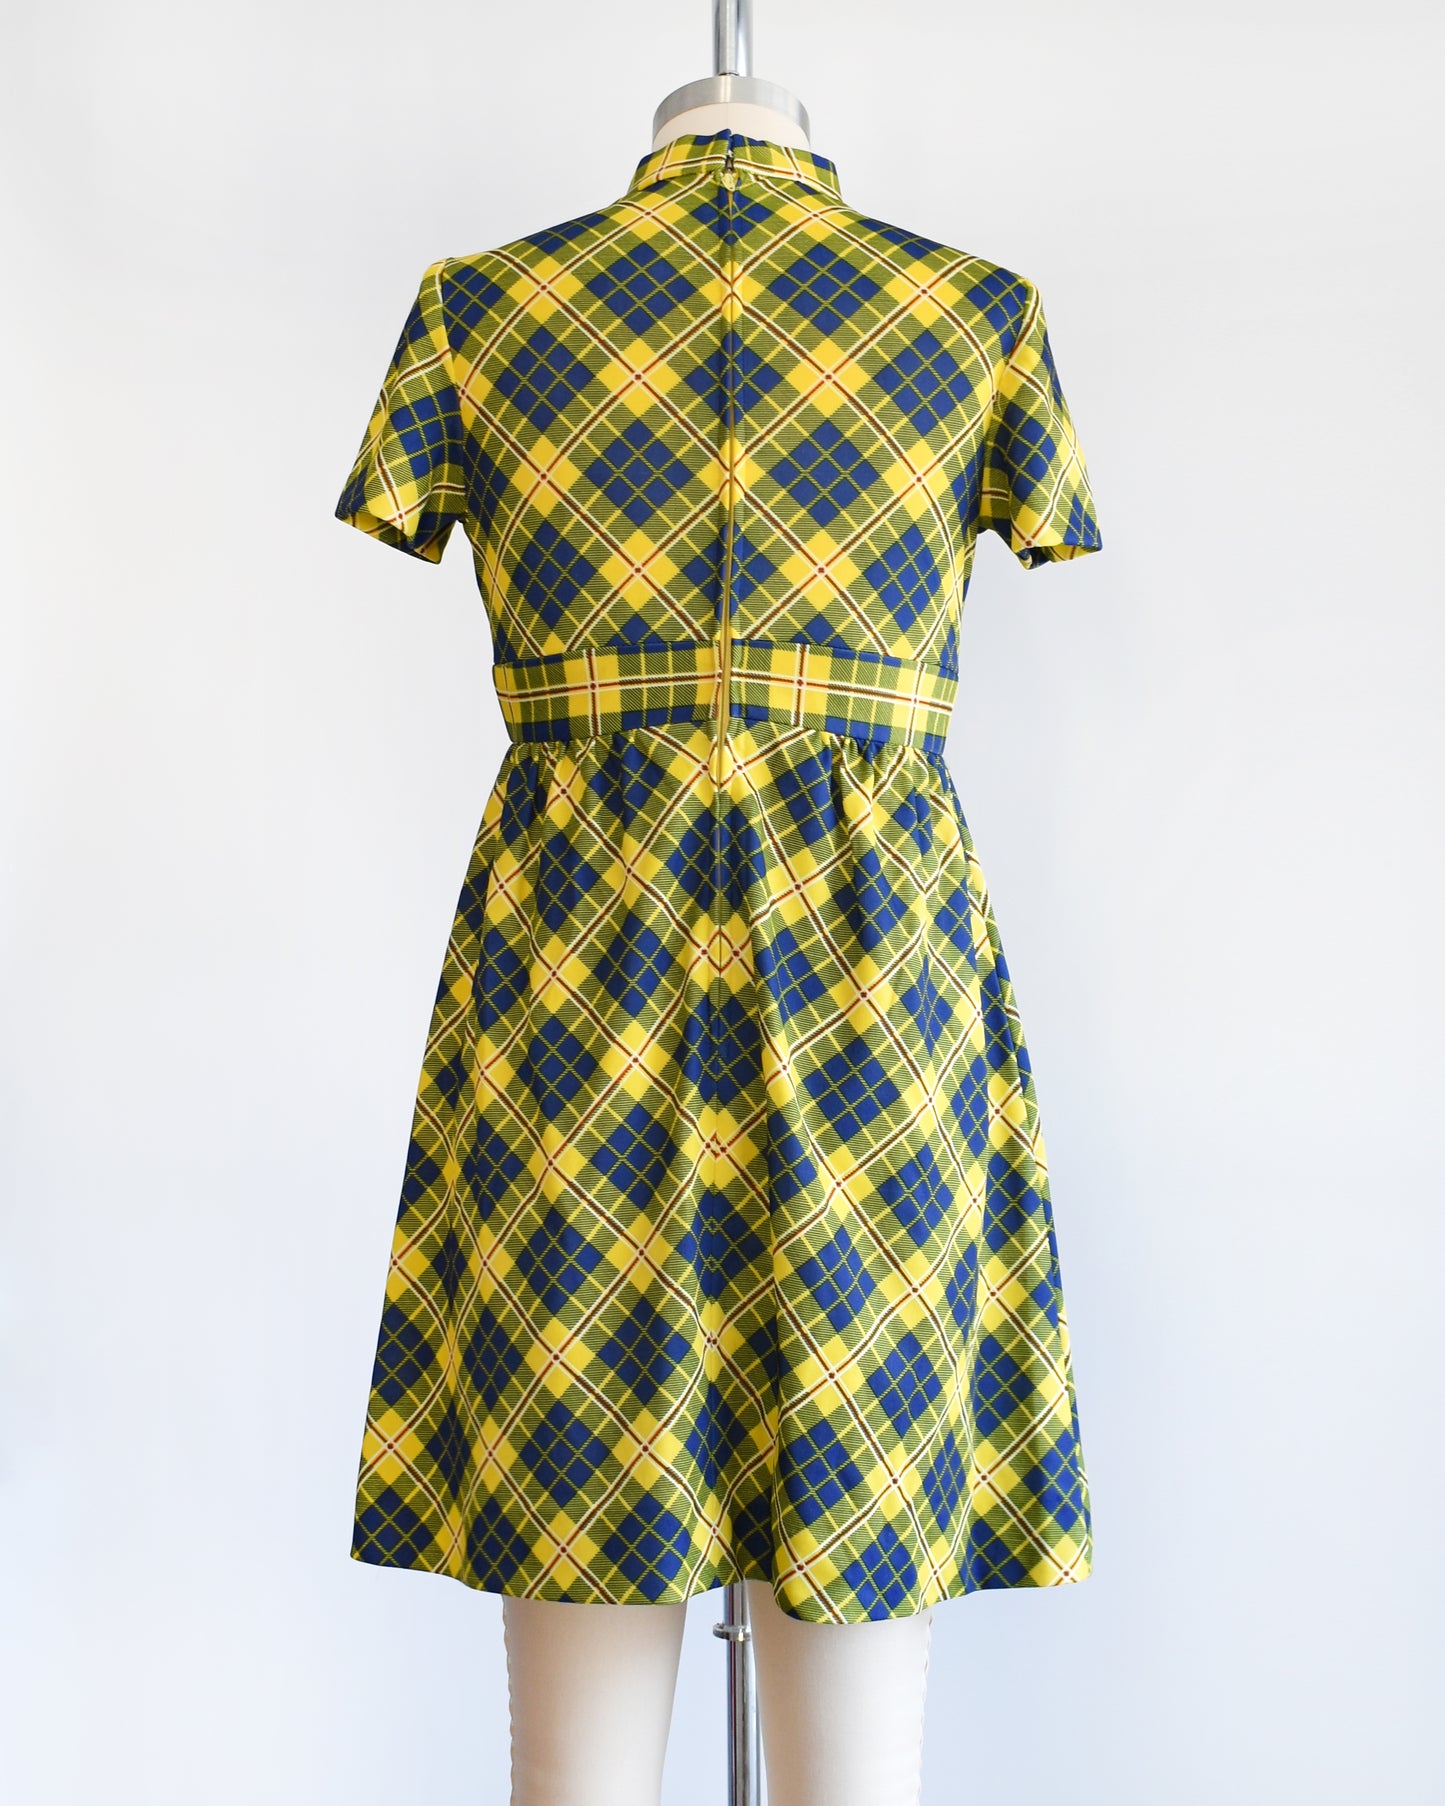 back view of a yellow and blue plaid mod mini dress